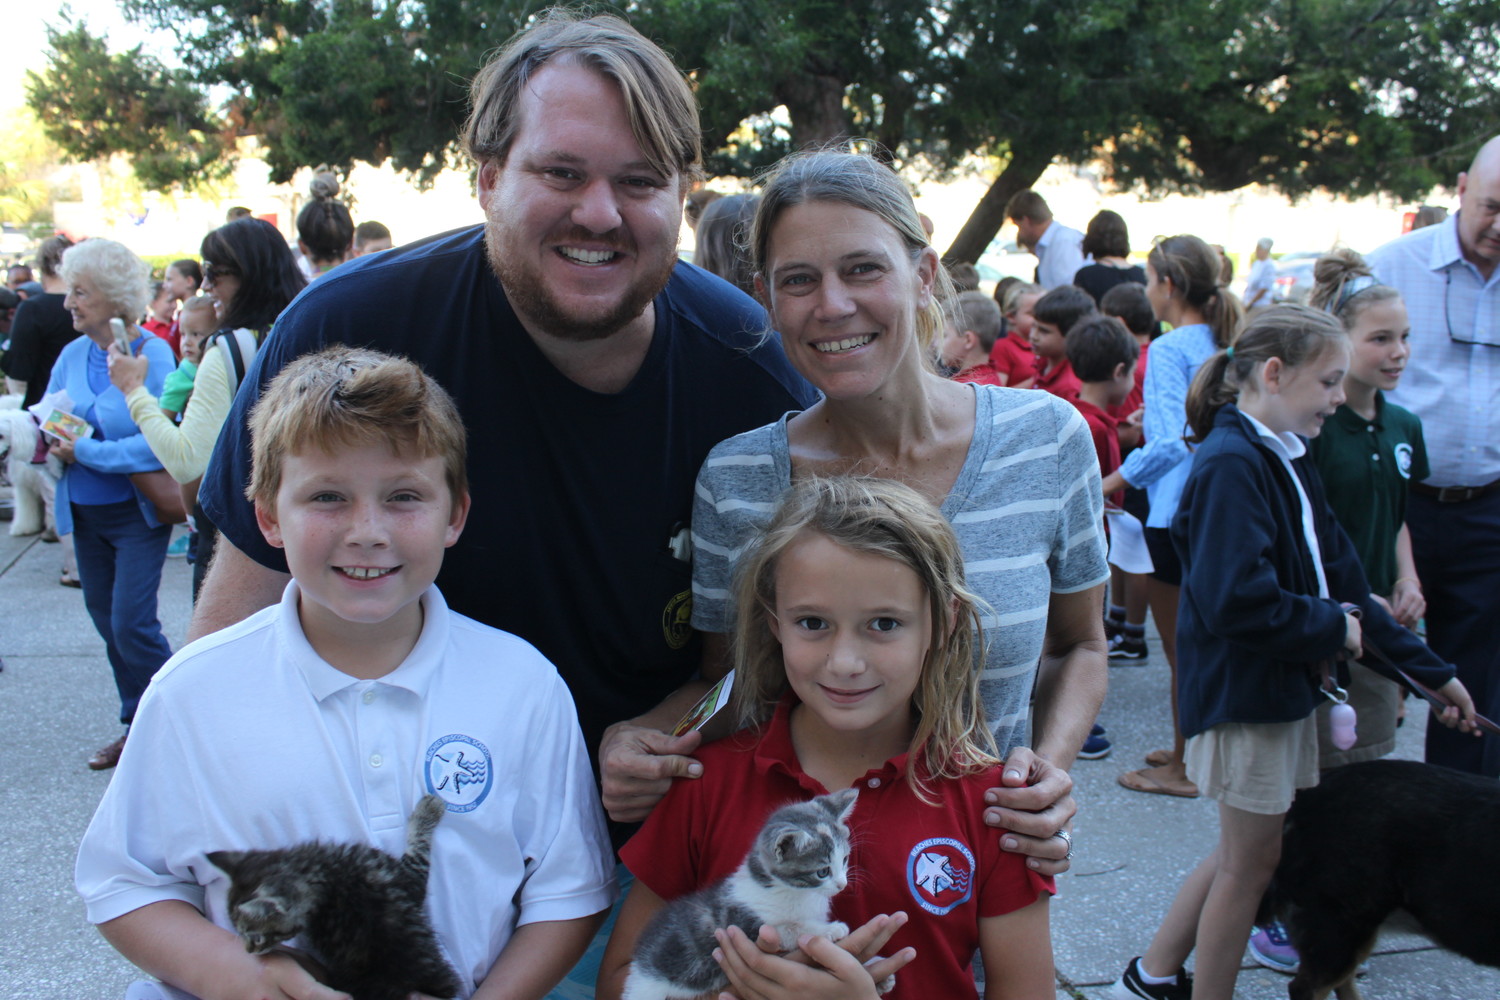 Families gather at Beaches Episcopal’s annual event.